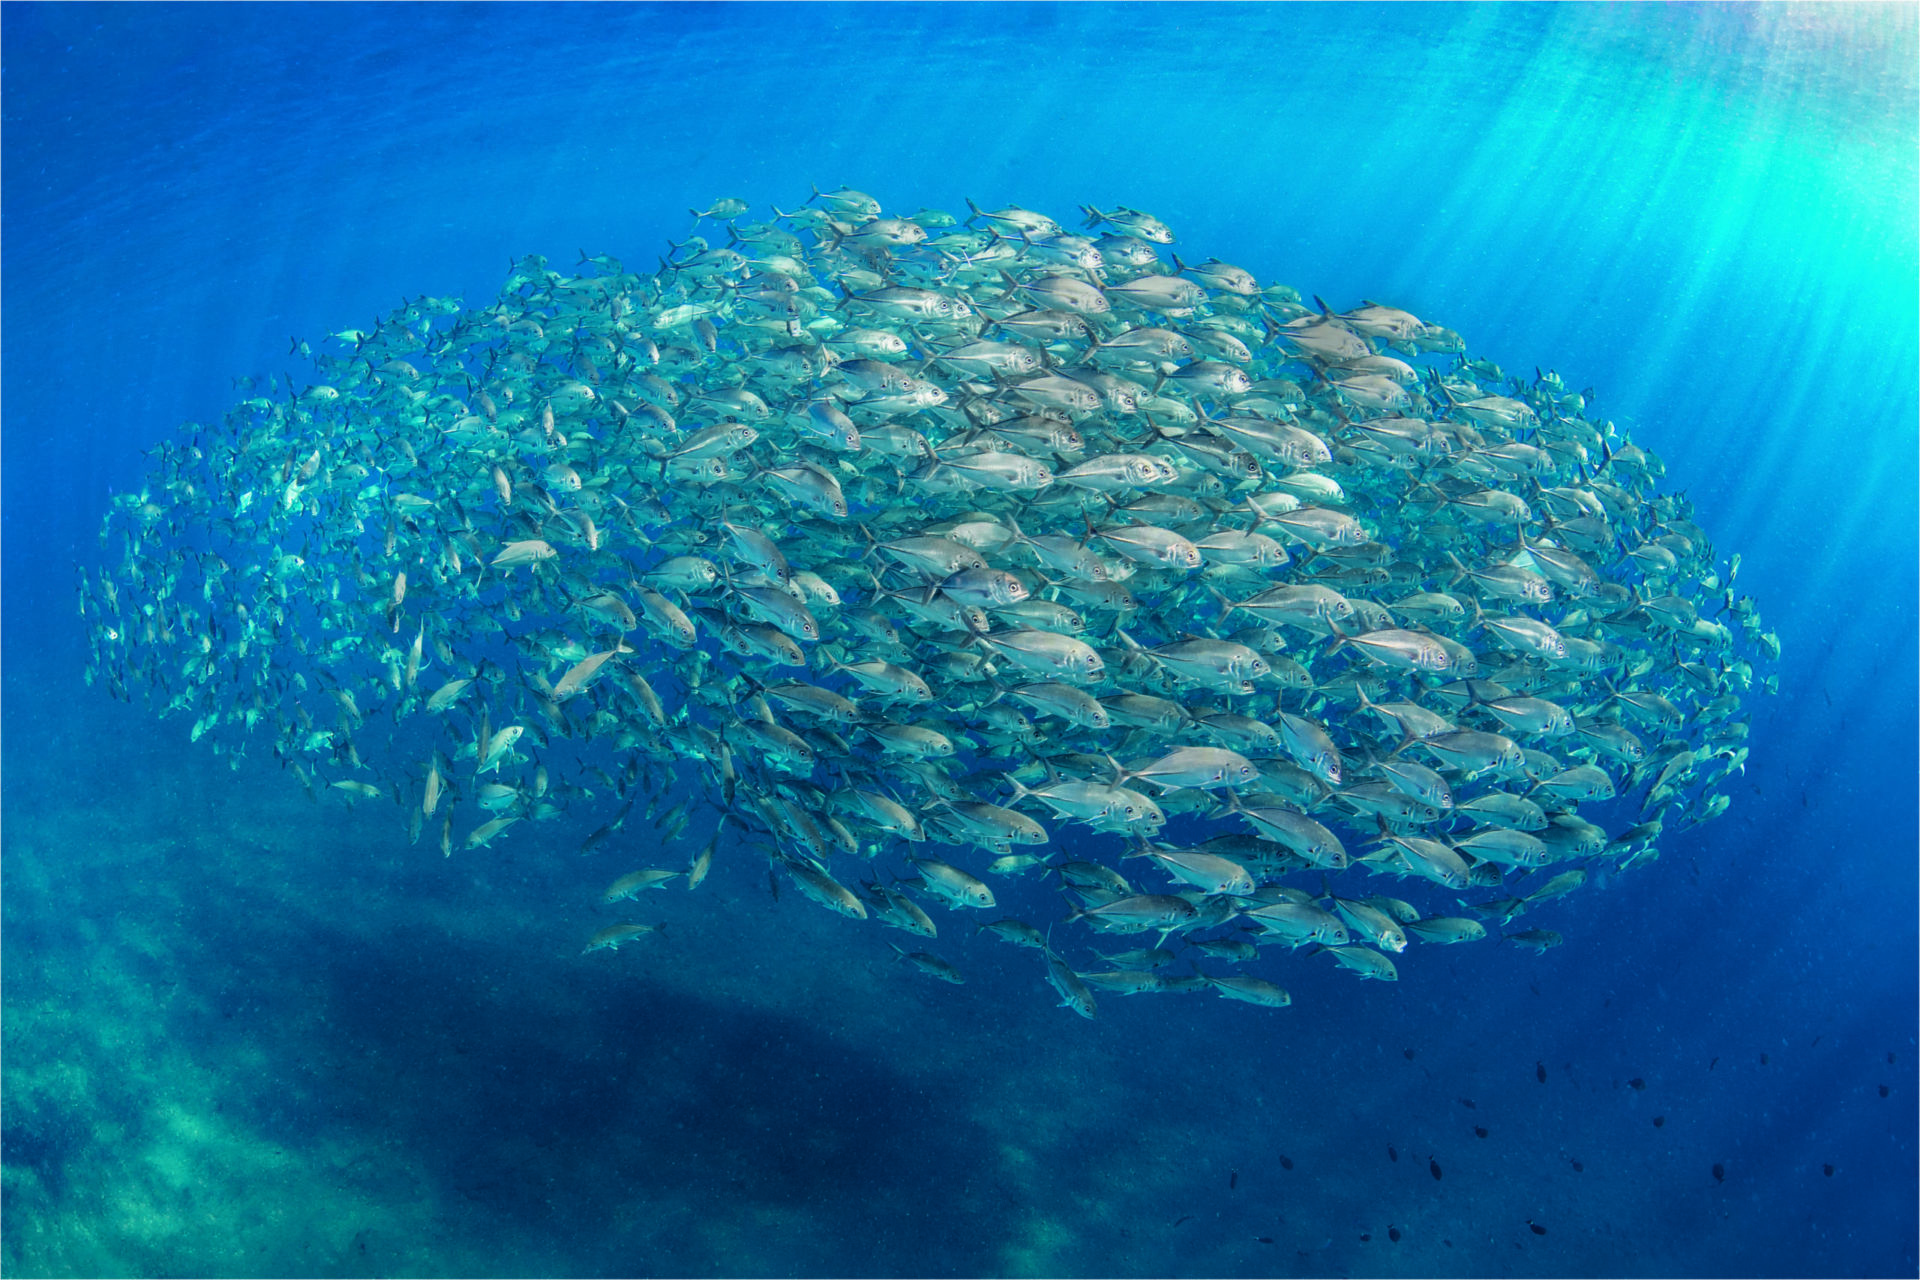 Breaking the adage of getting close – get back to capture entire shoal